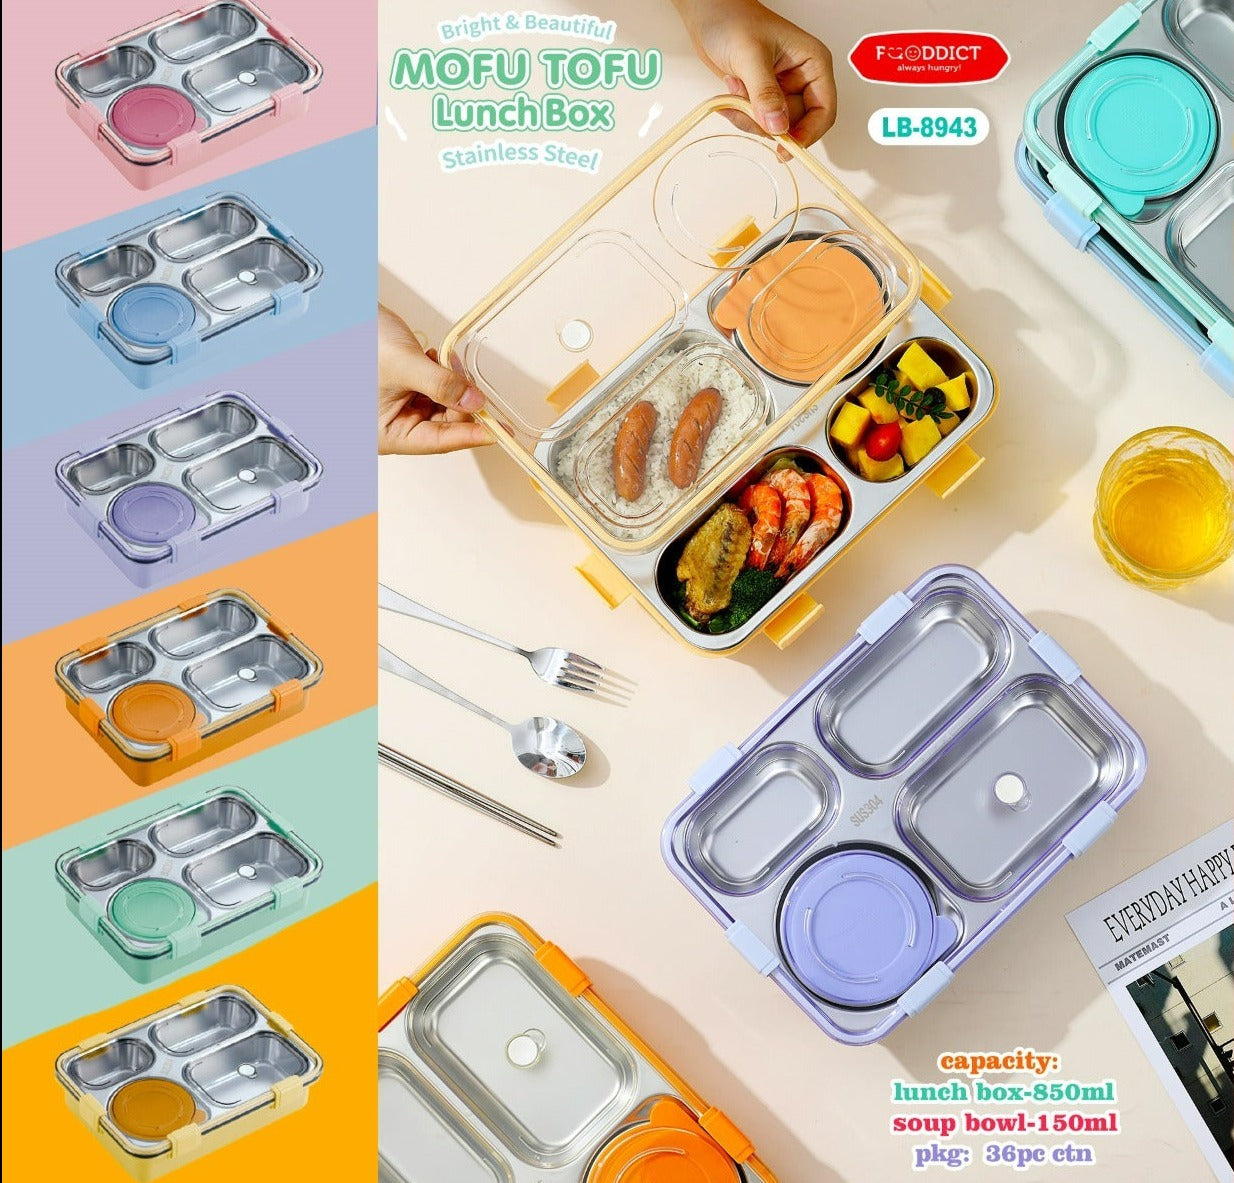 Stainless Steel 304 Divided Lunch Box Bento with Soup Bowl